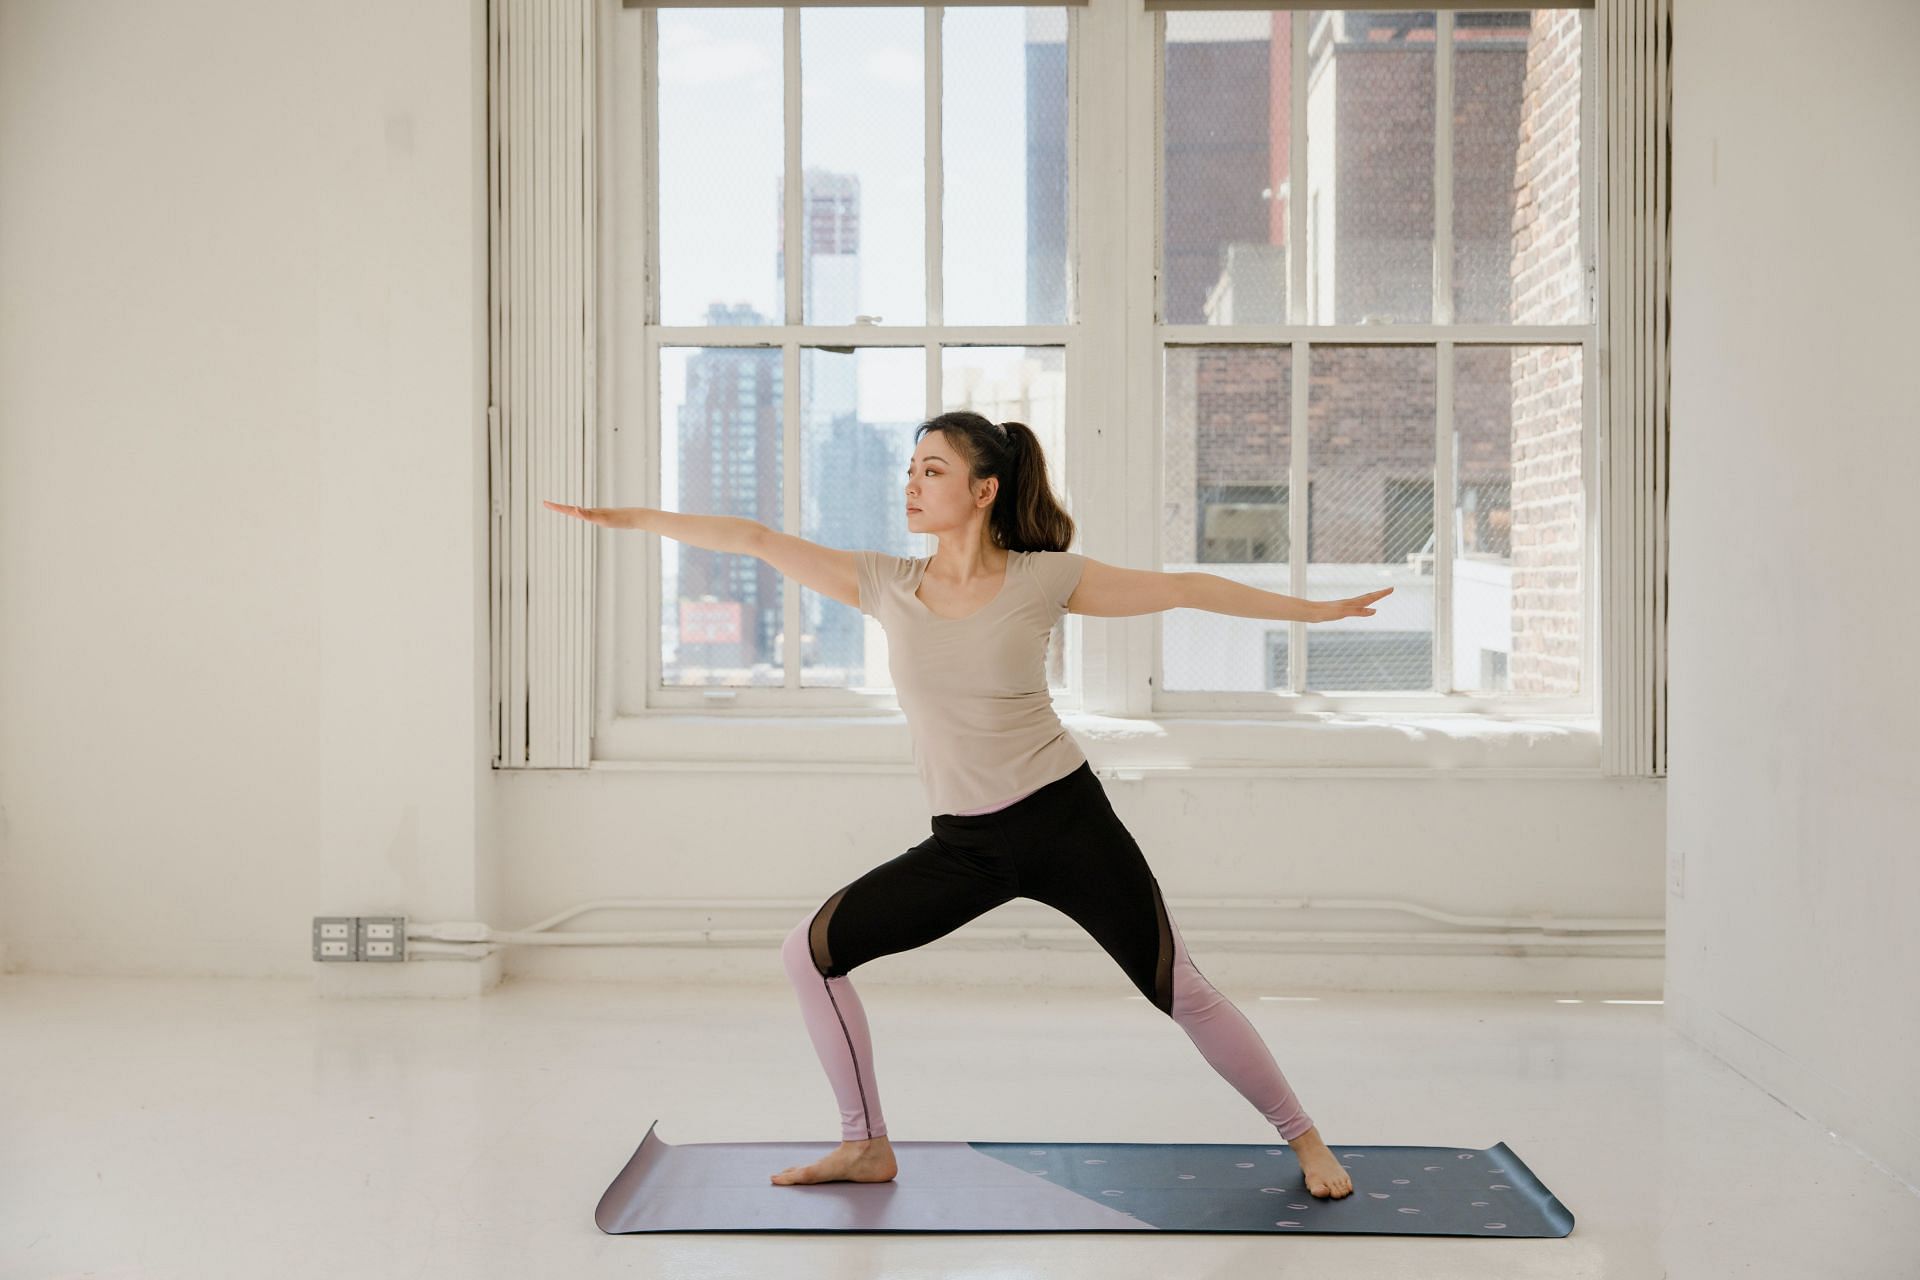 BIkram yoga is performed inside a room heated to 95-105 degrees. (Image via Pexels/Rodnae Productions)